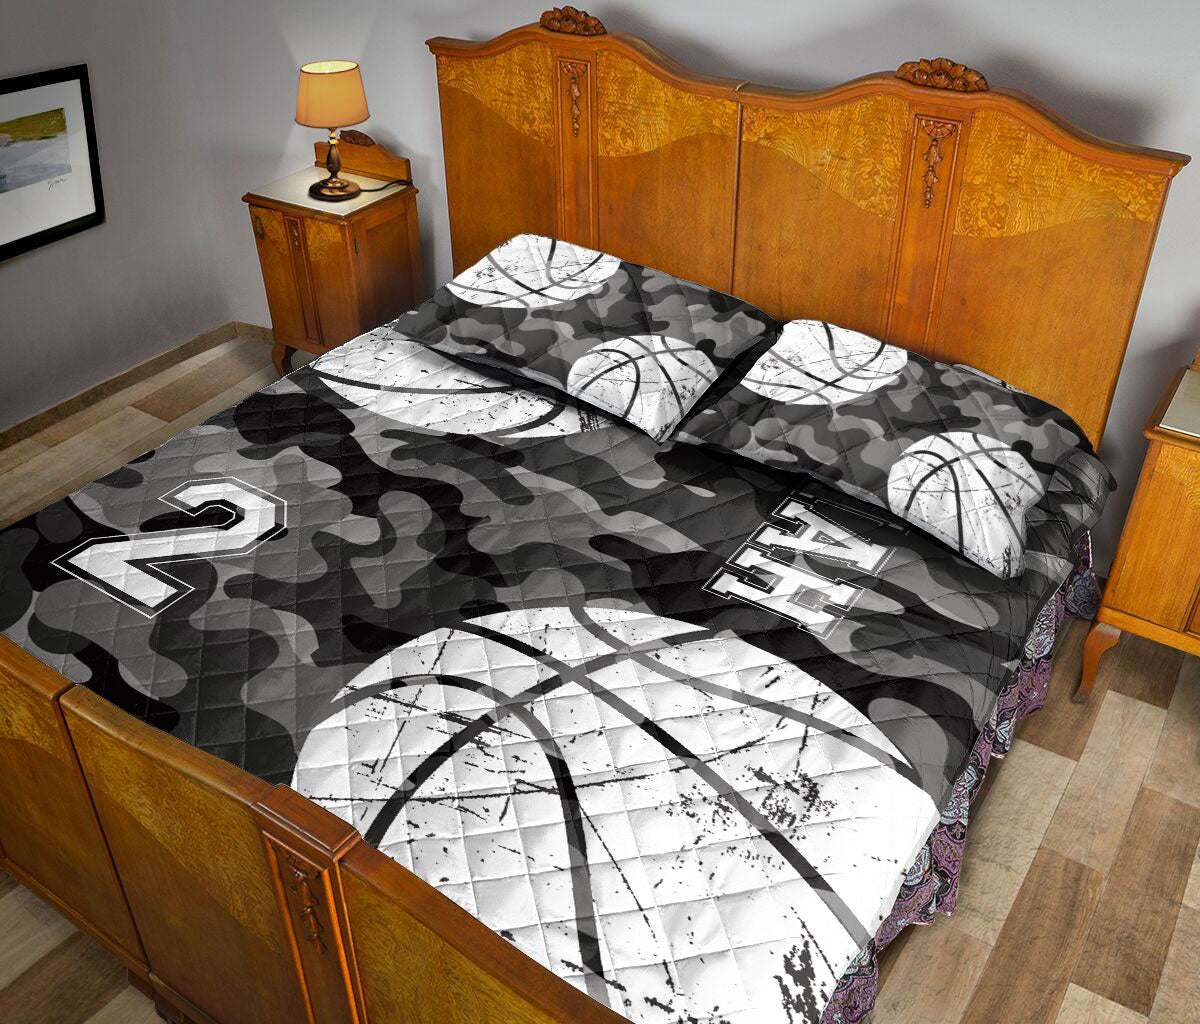 Ohaprints-Quilt-Bed-Set-Pillowcase-Basketball-Ball-Black-Camo-Pattern-Sports-Gift-Custom-Personalized-Name-Number-Blanket-Bedspread-Bedding-1815-Queen (80'' x 90'')